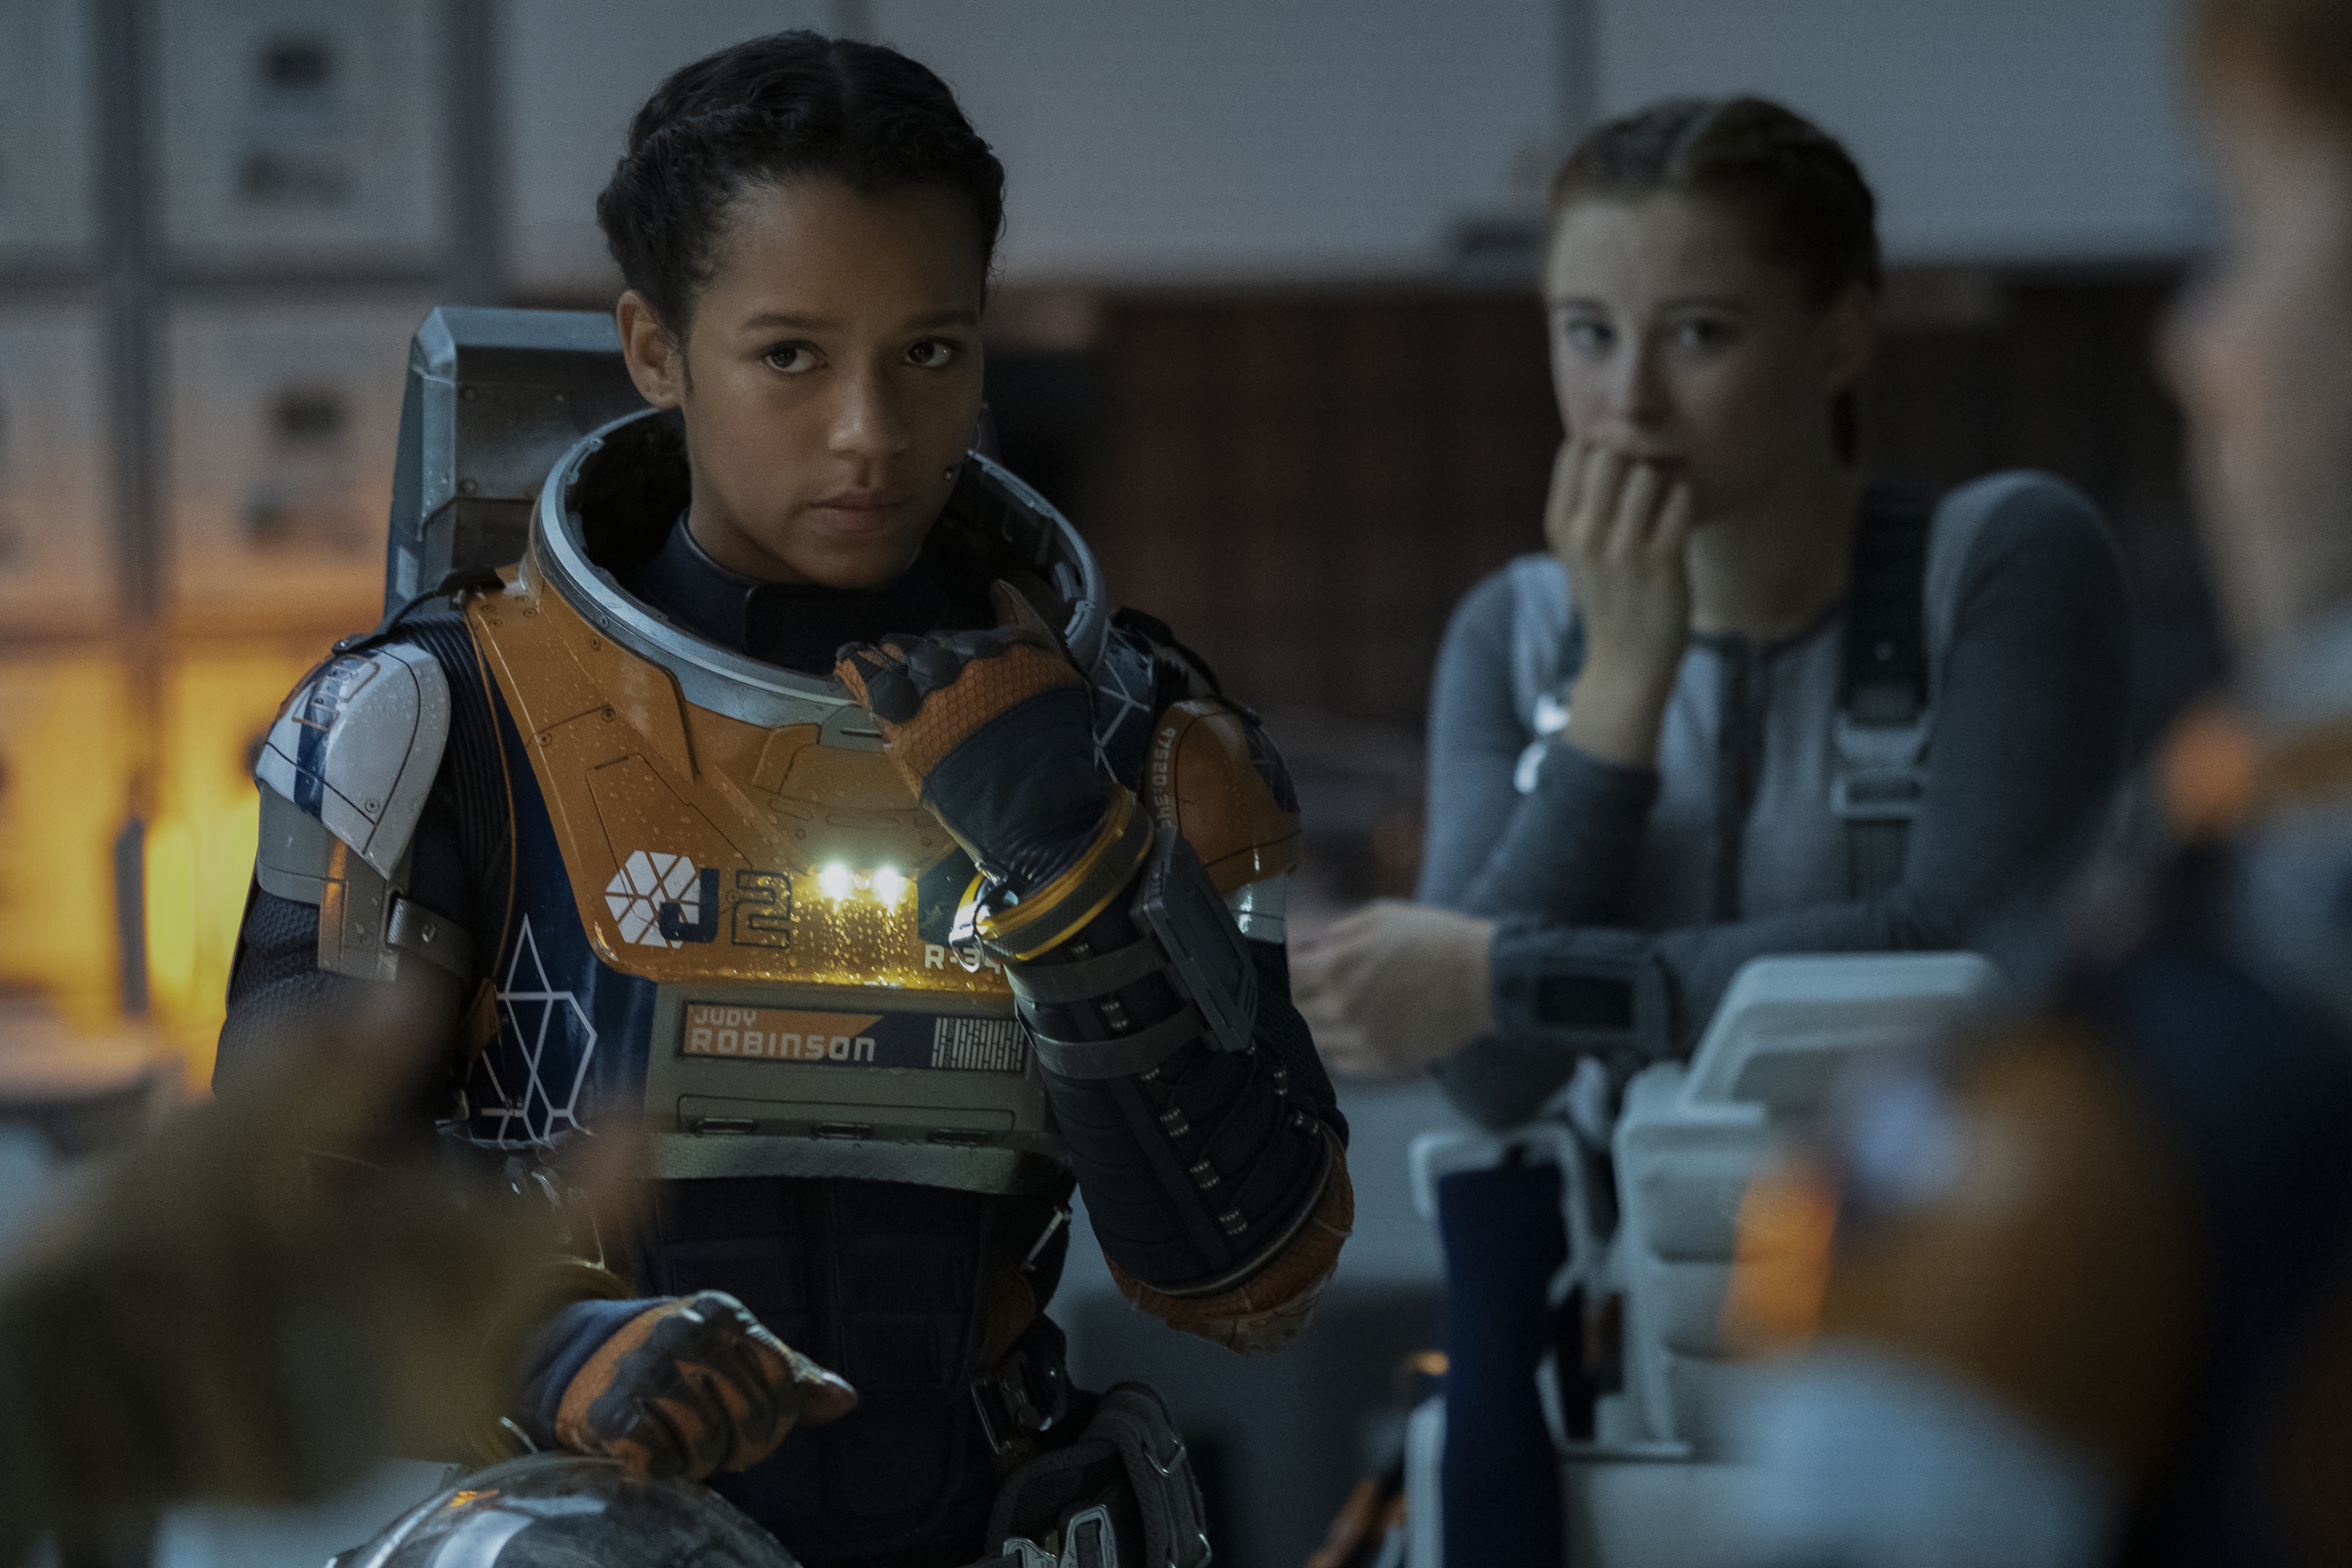 tv show, lost in space, judy robinson, taylor russell